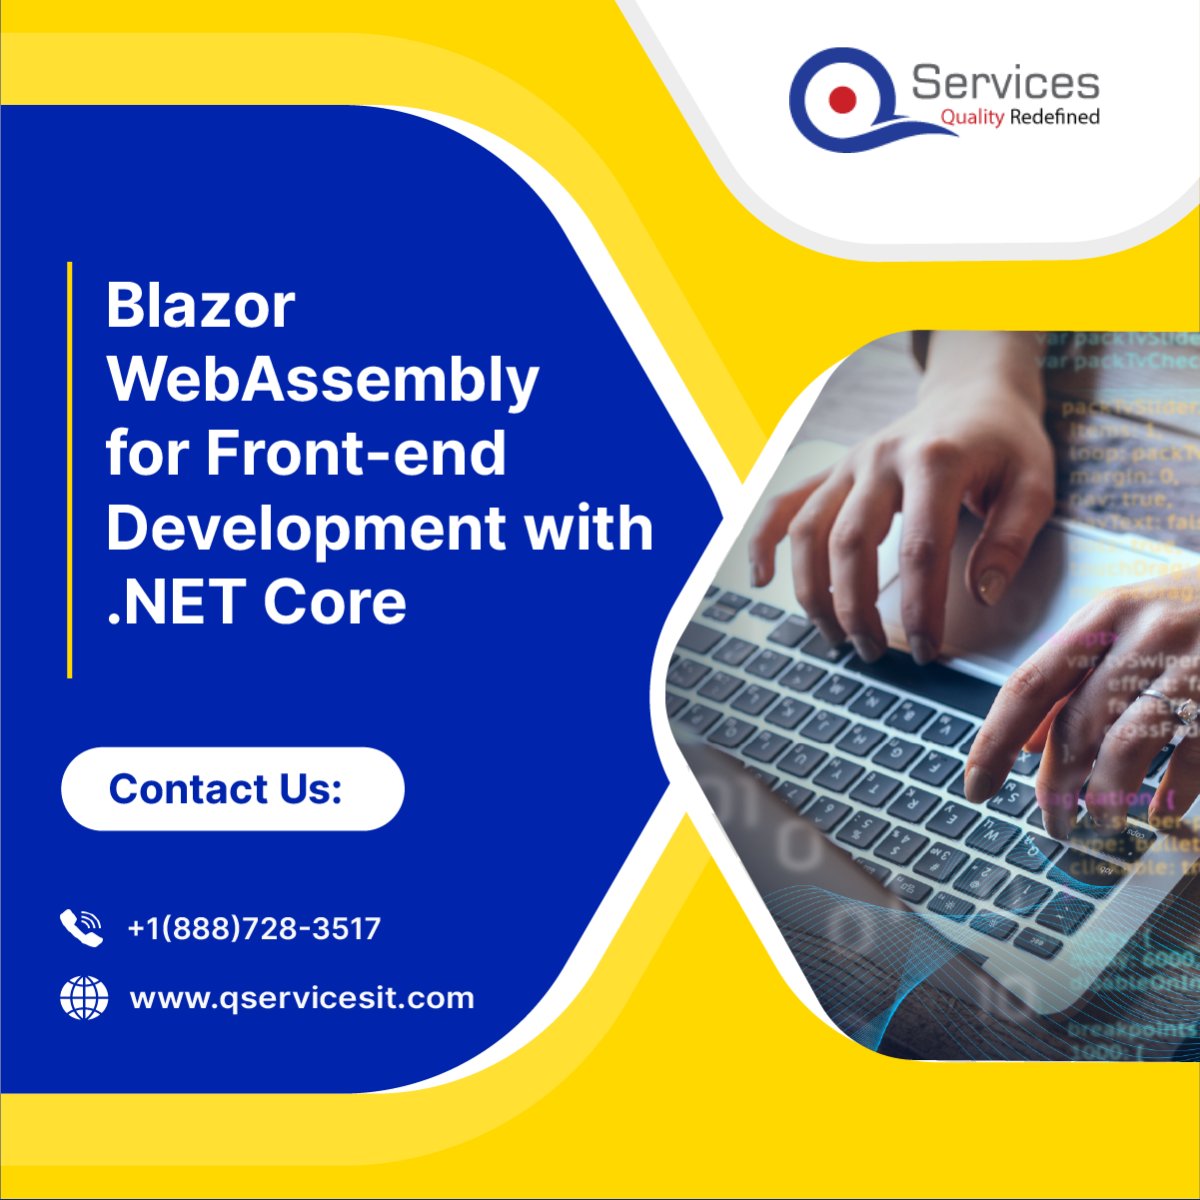 Blazor WebAssembly is a framework that allows developers to build interactive and dynamic web applications using .NET Core and C#. 

𝐅𝐨𝐫 𝐦𝐨𝐫𝐞 𝐢𝐧𝐟𝐨𝐫𝐦𝐚𝐭𝐢𝐨𝐧: qservicesit.com

#netcore #webassembly #webassemblydev #blazorassembly #netcore #QServices